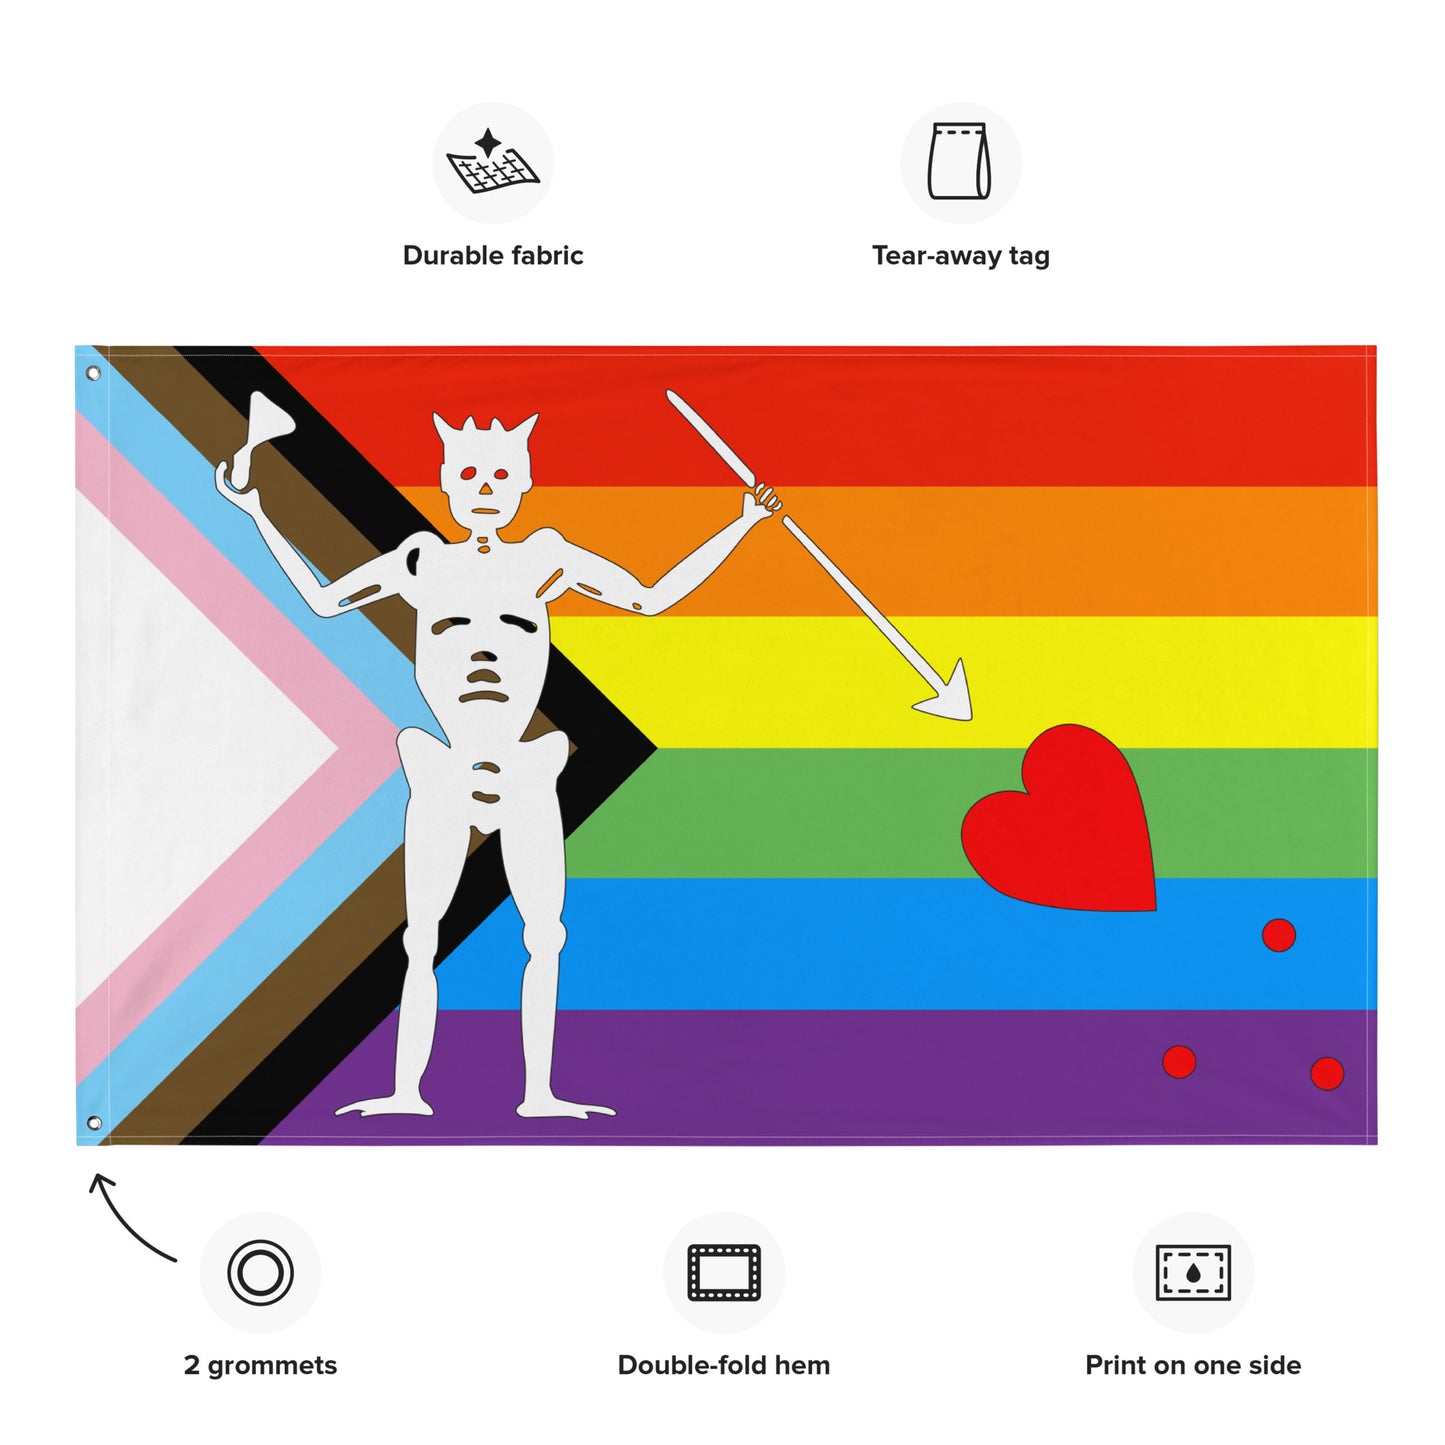 the progress pride flag with blackbeard's symbol surrounded by the specifications of "durable fabric, tear-away tag, 2 grommets, double-fold hem, print on one side"